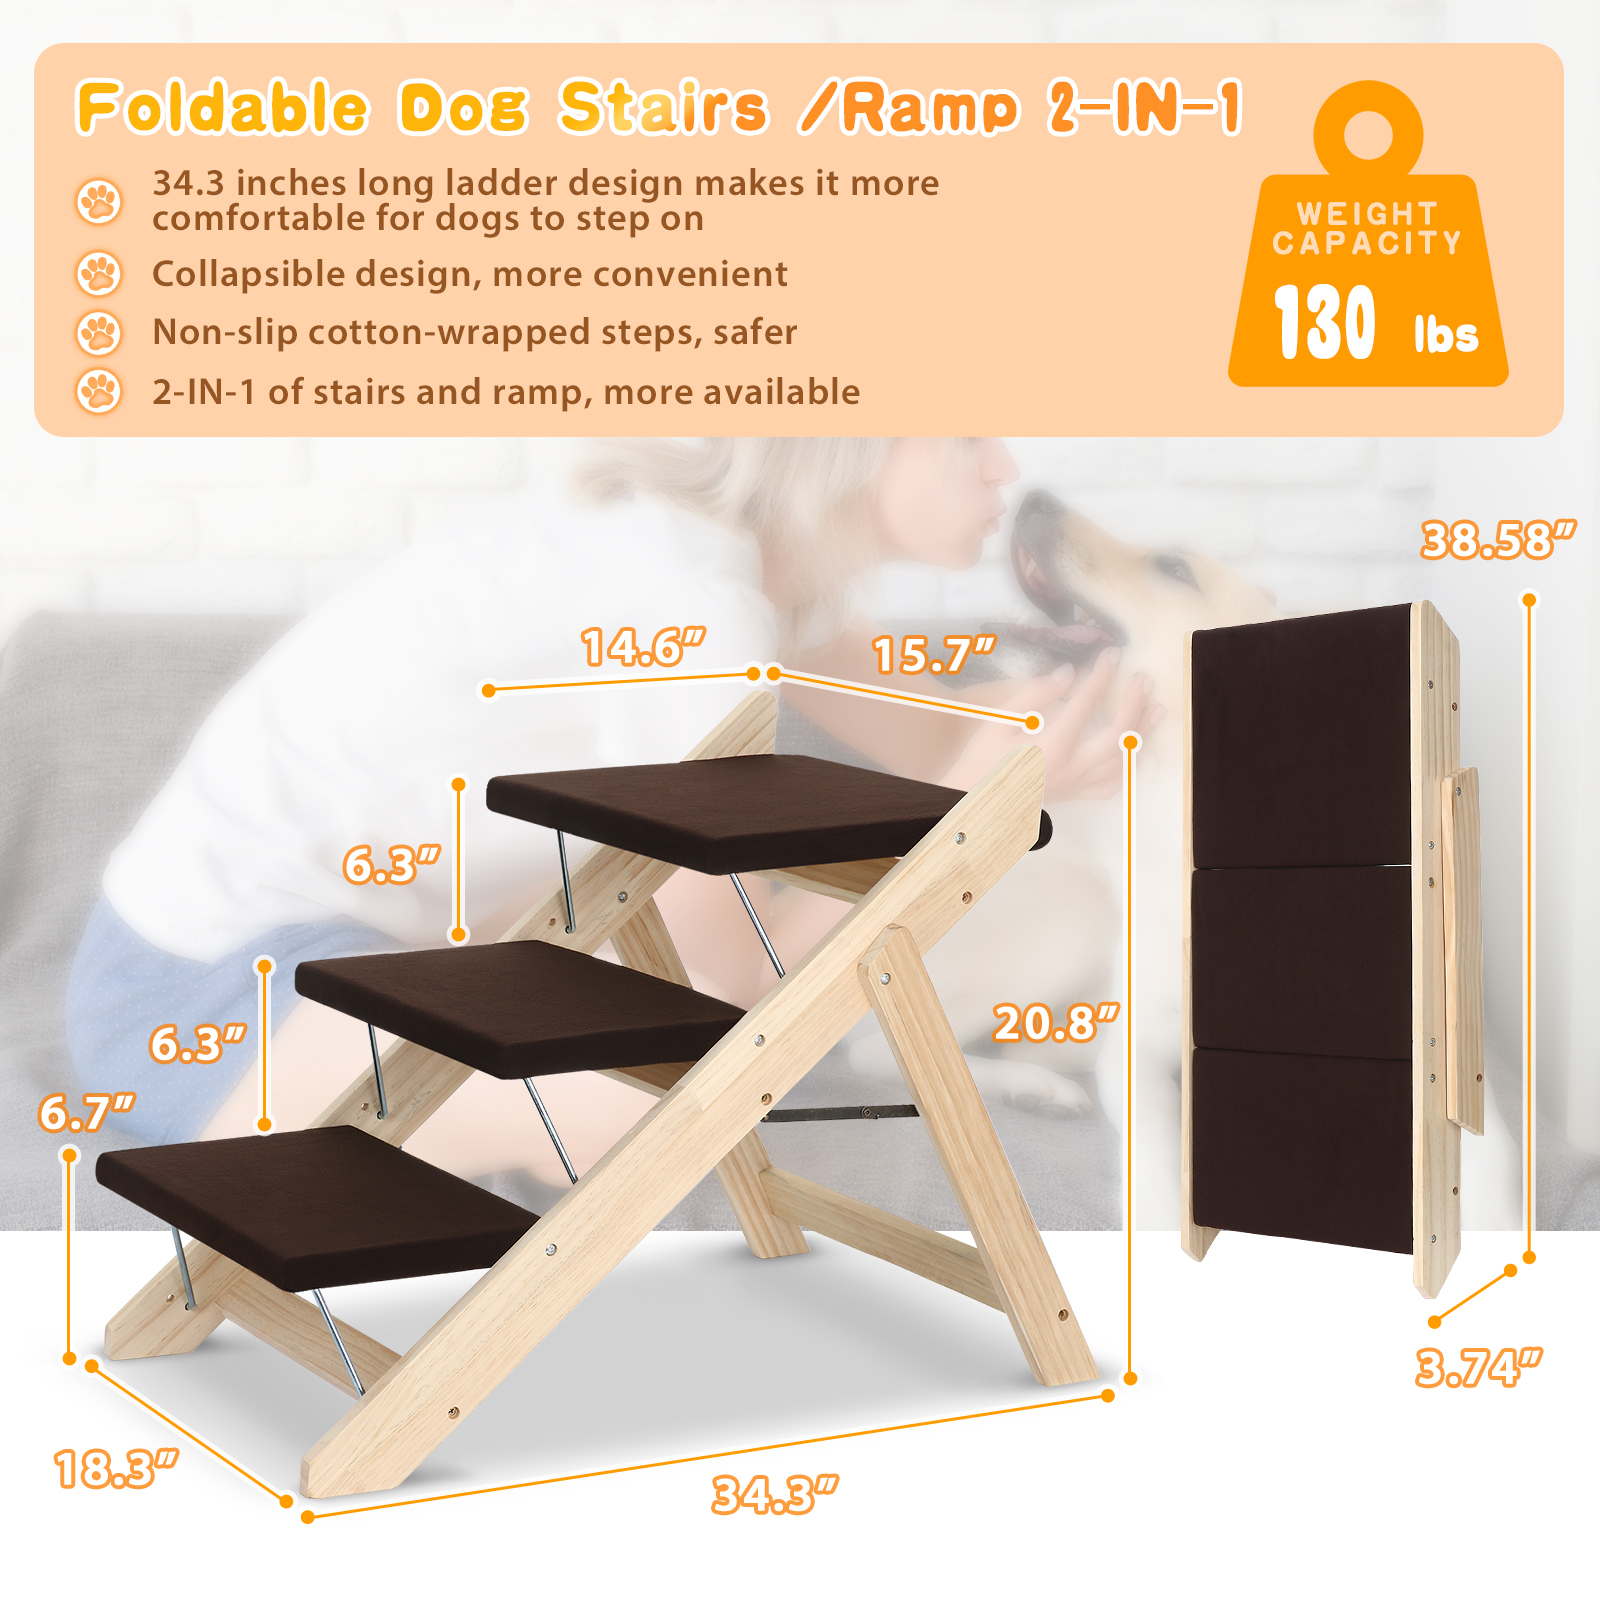 PawGiant-2in1-Dog-Stairs--Ramp-Foldable-Wide-Step-for-High-Beds-Couch-and-Cars-for-Small-Medium-and--1957281-2